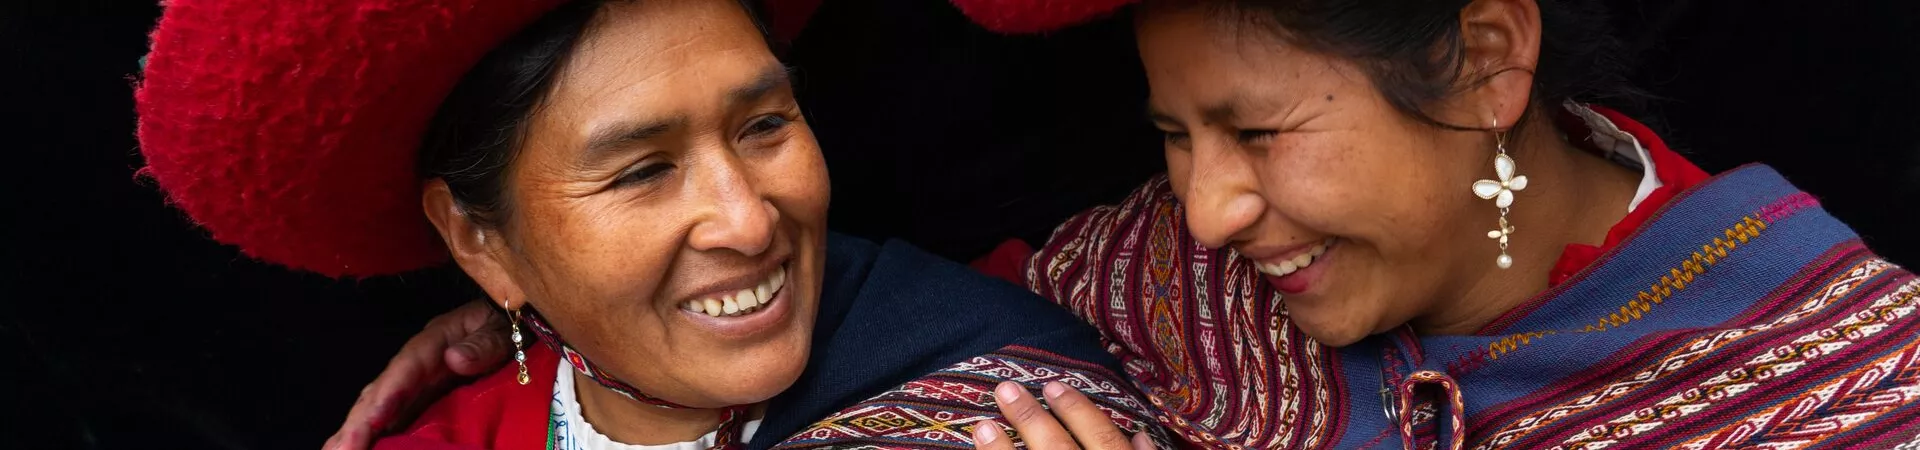 Large Portrait Of Two Local Women Who Are Close Friends, In Colourful, Predominantly Red, Traditional Local Dress And Hats, Chinchero, Sacred Valley, Peru ( 1153913714